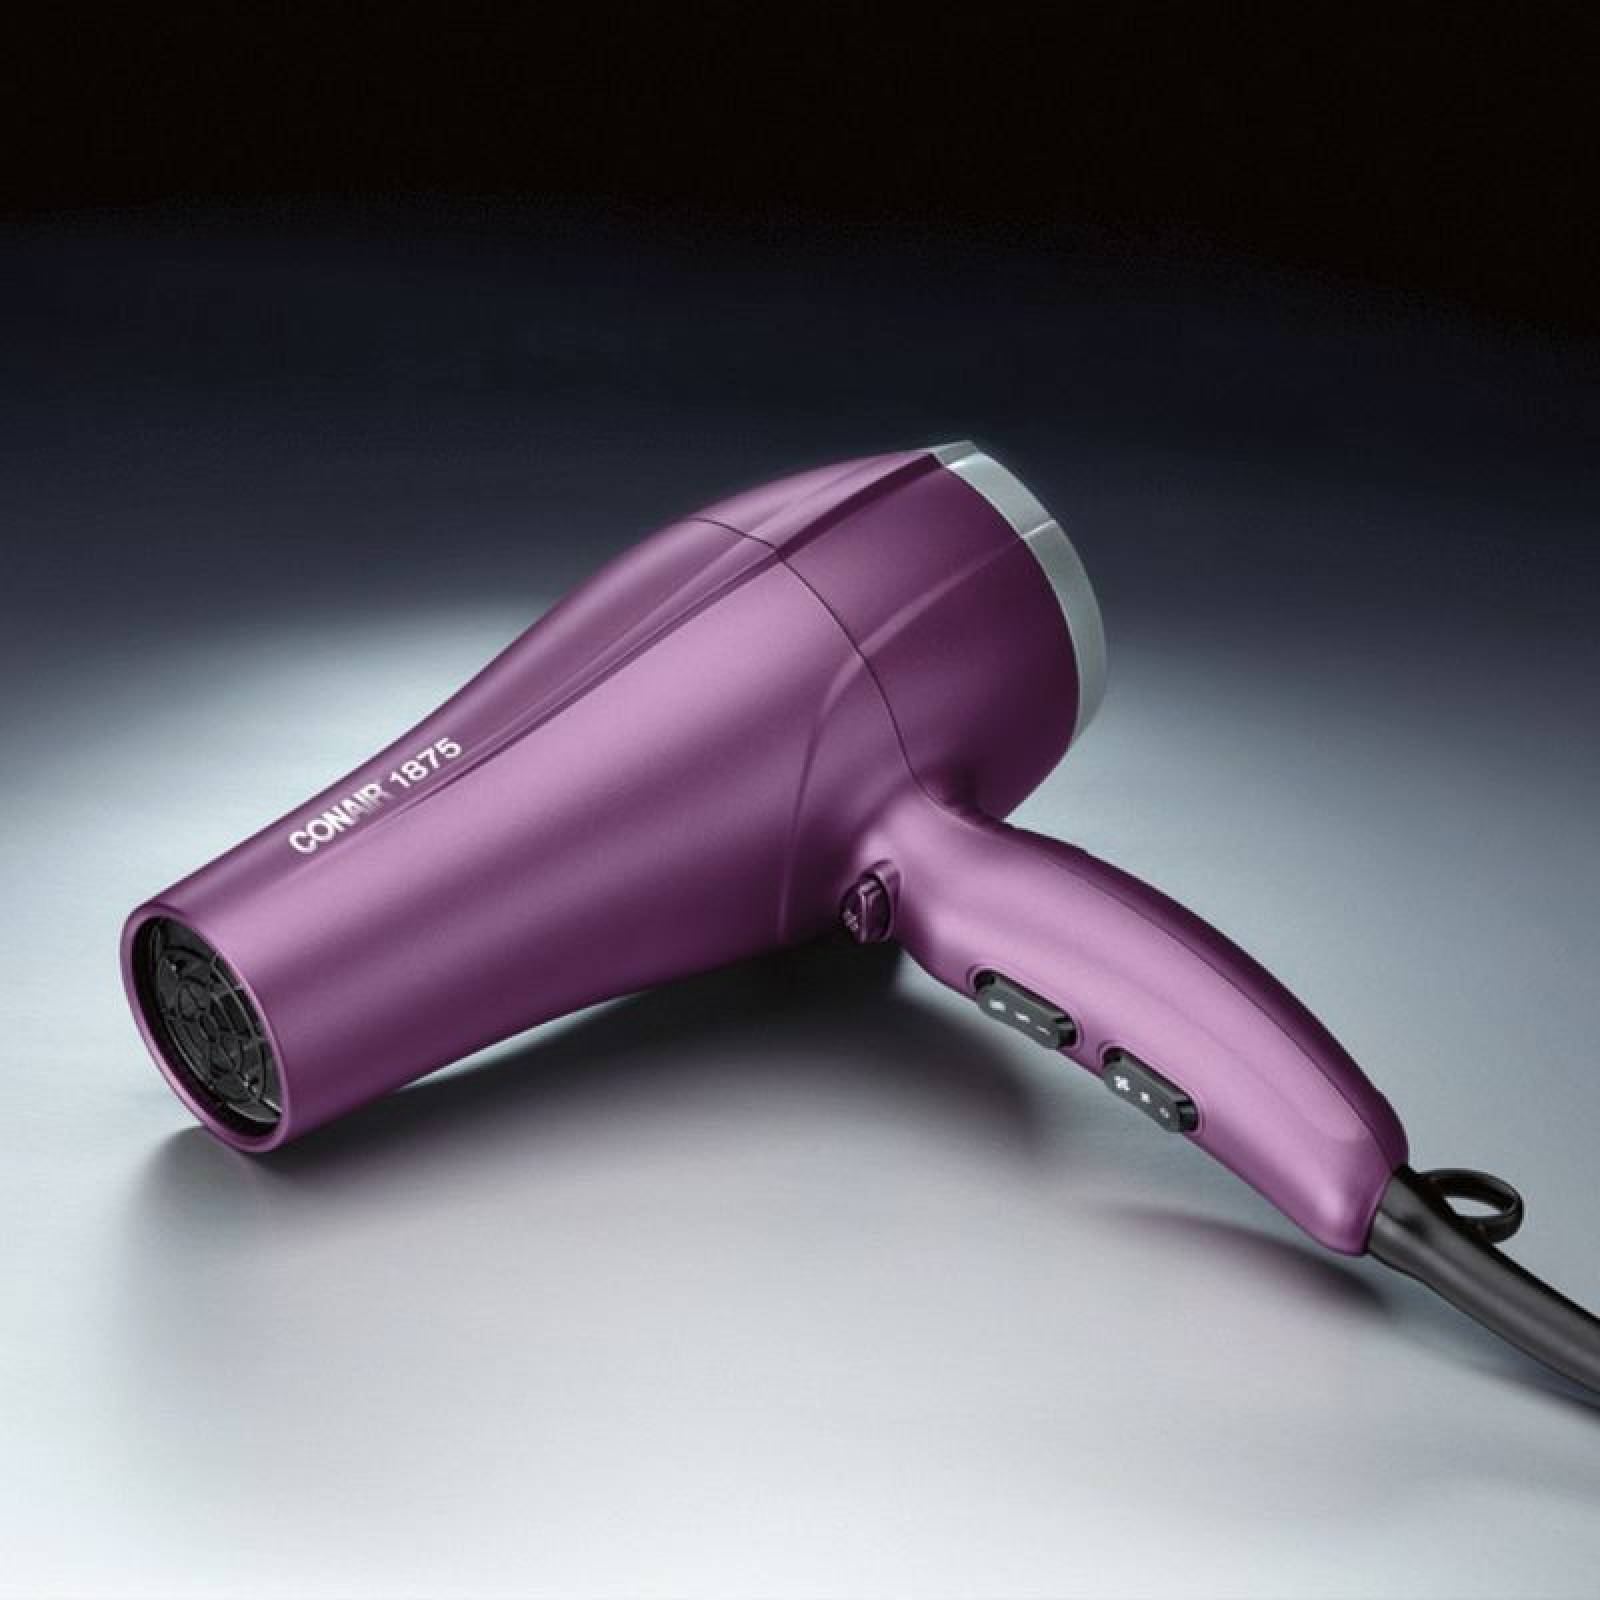 Secadora smooth ultra fast drying velvet orchid 2300 565ES MX